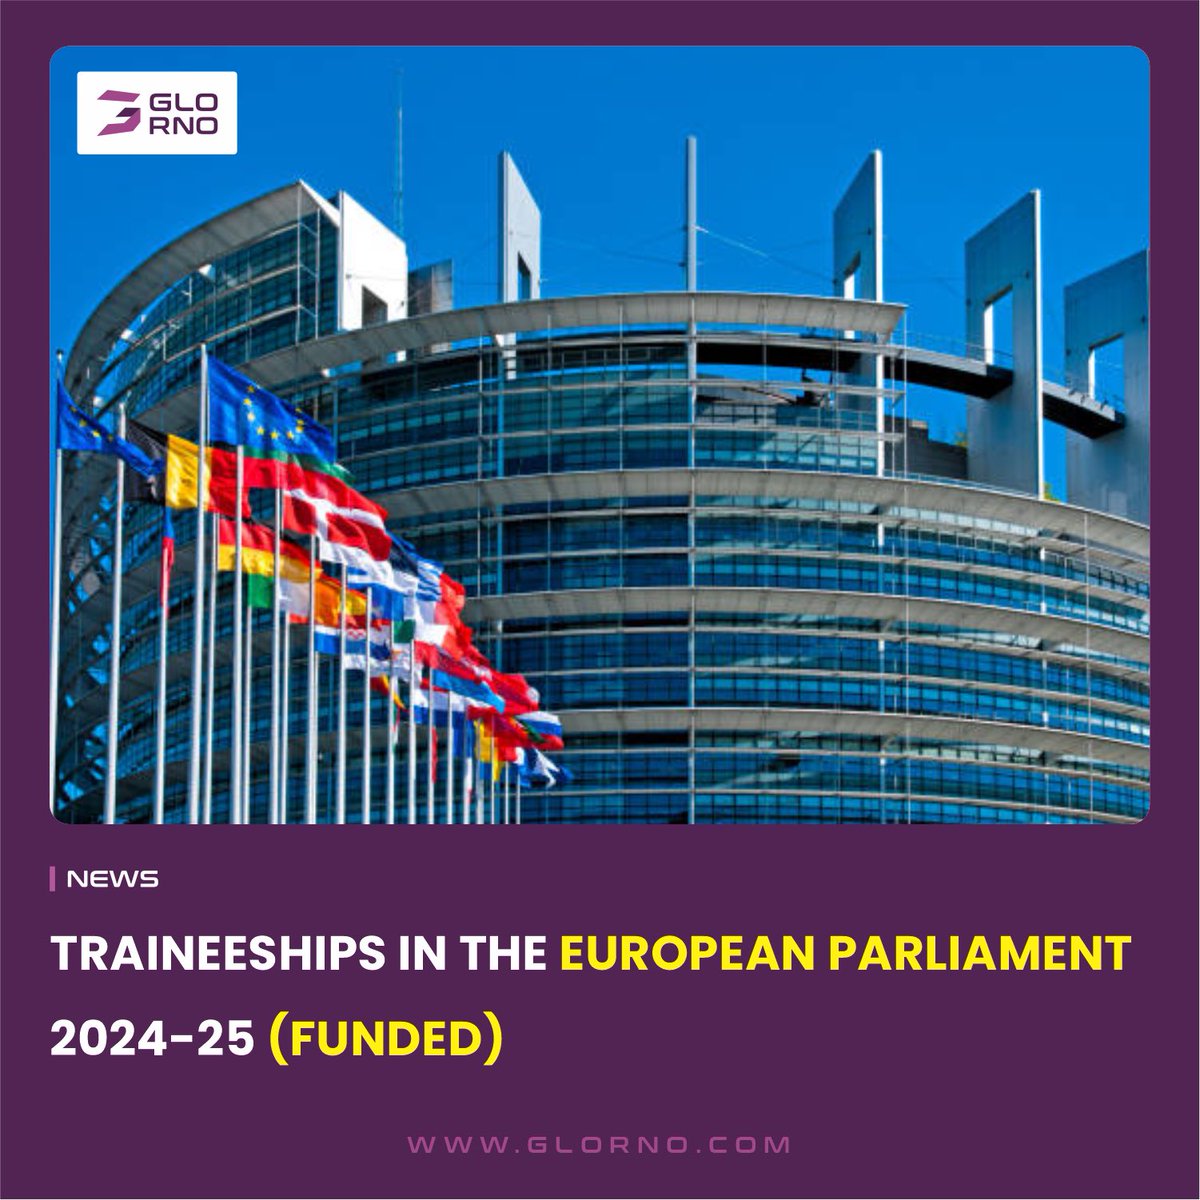 🇪🇺 Exciting opportunity for aspiring leaders! Traineeships in the European Parliament for 2024-25 are now available, fully funded. Don't miss this chance to gain invaluable experience in European politics. Apply now! glorno.com/index.php/2024…

#EuropeanParliament #Traineeships